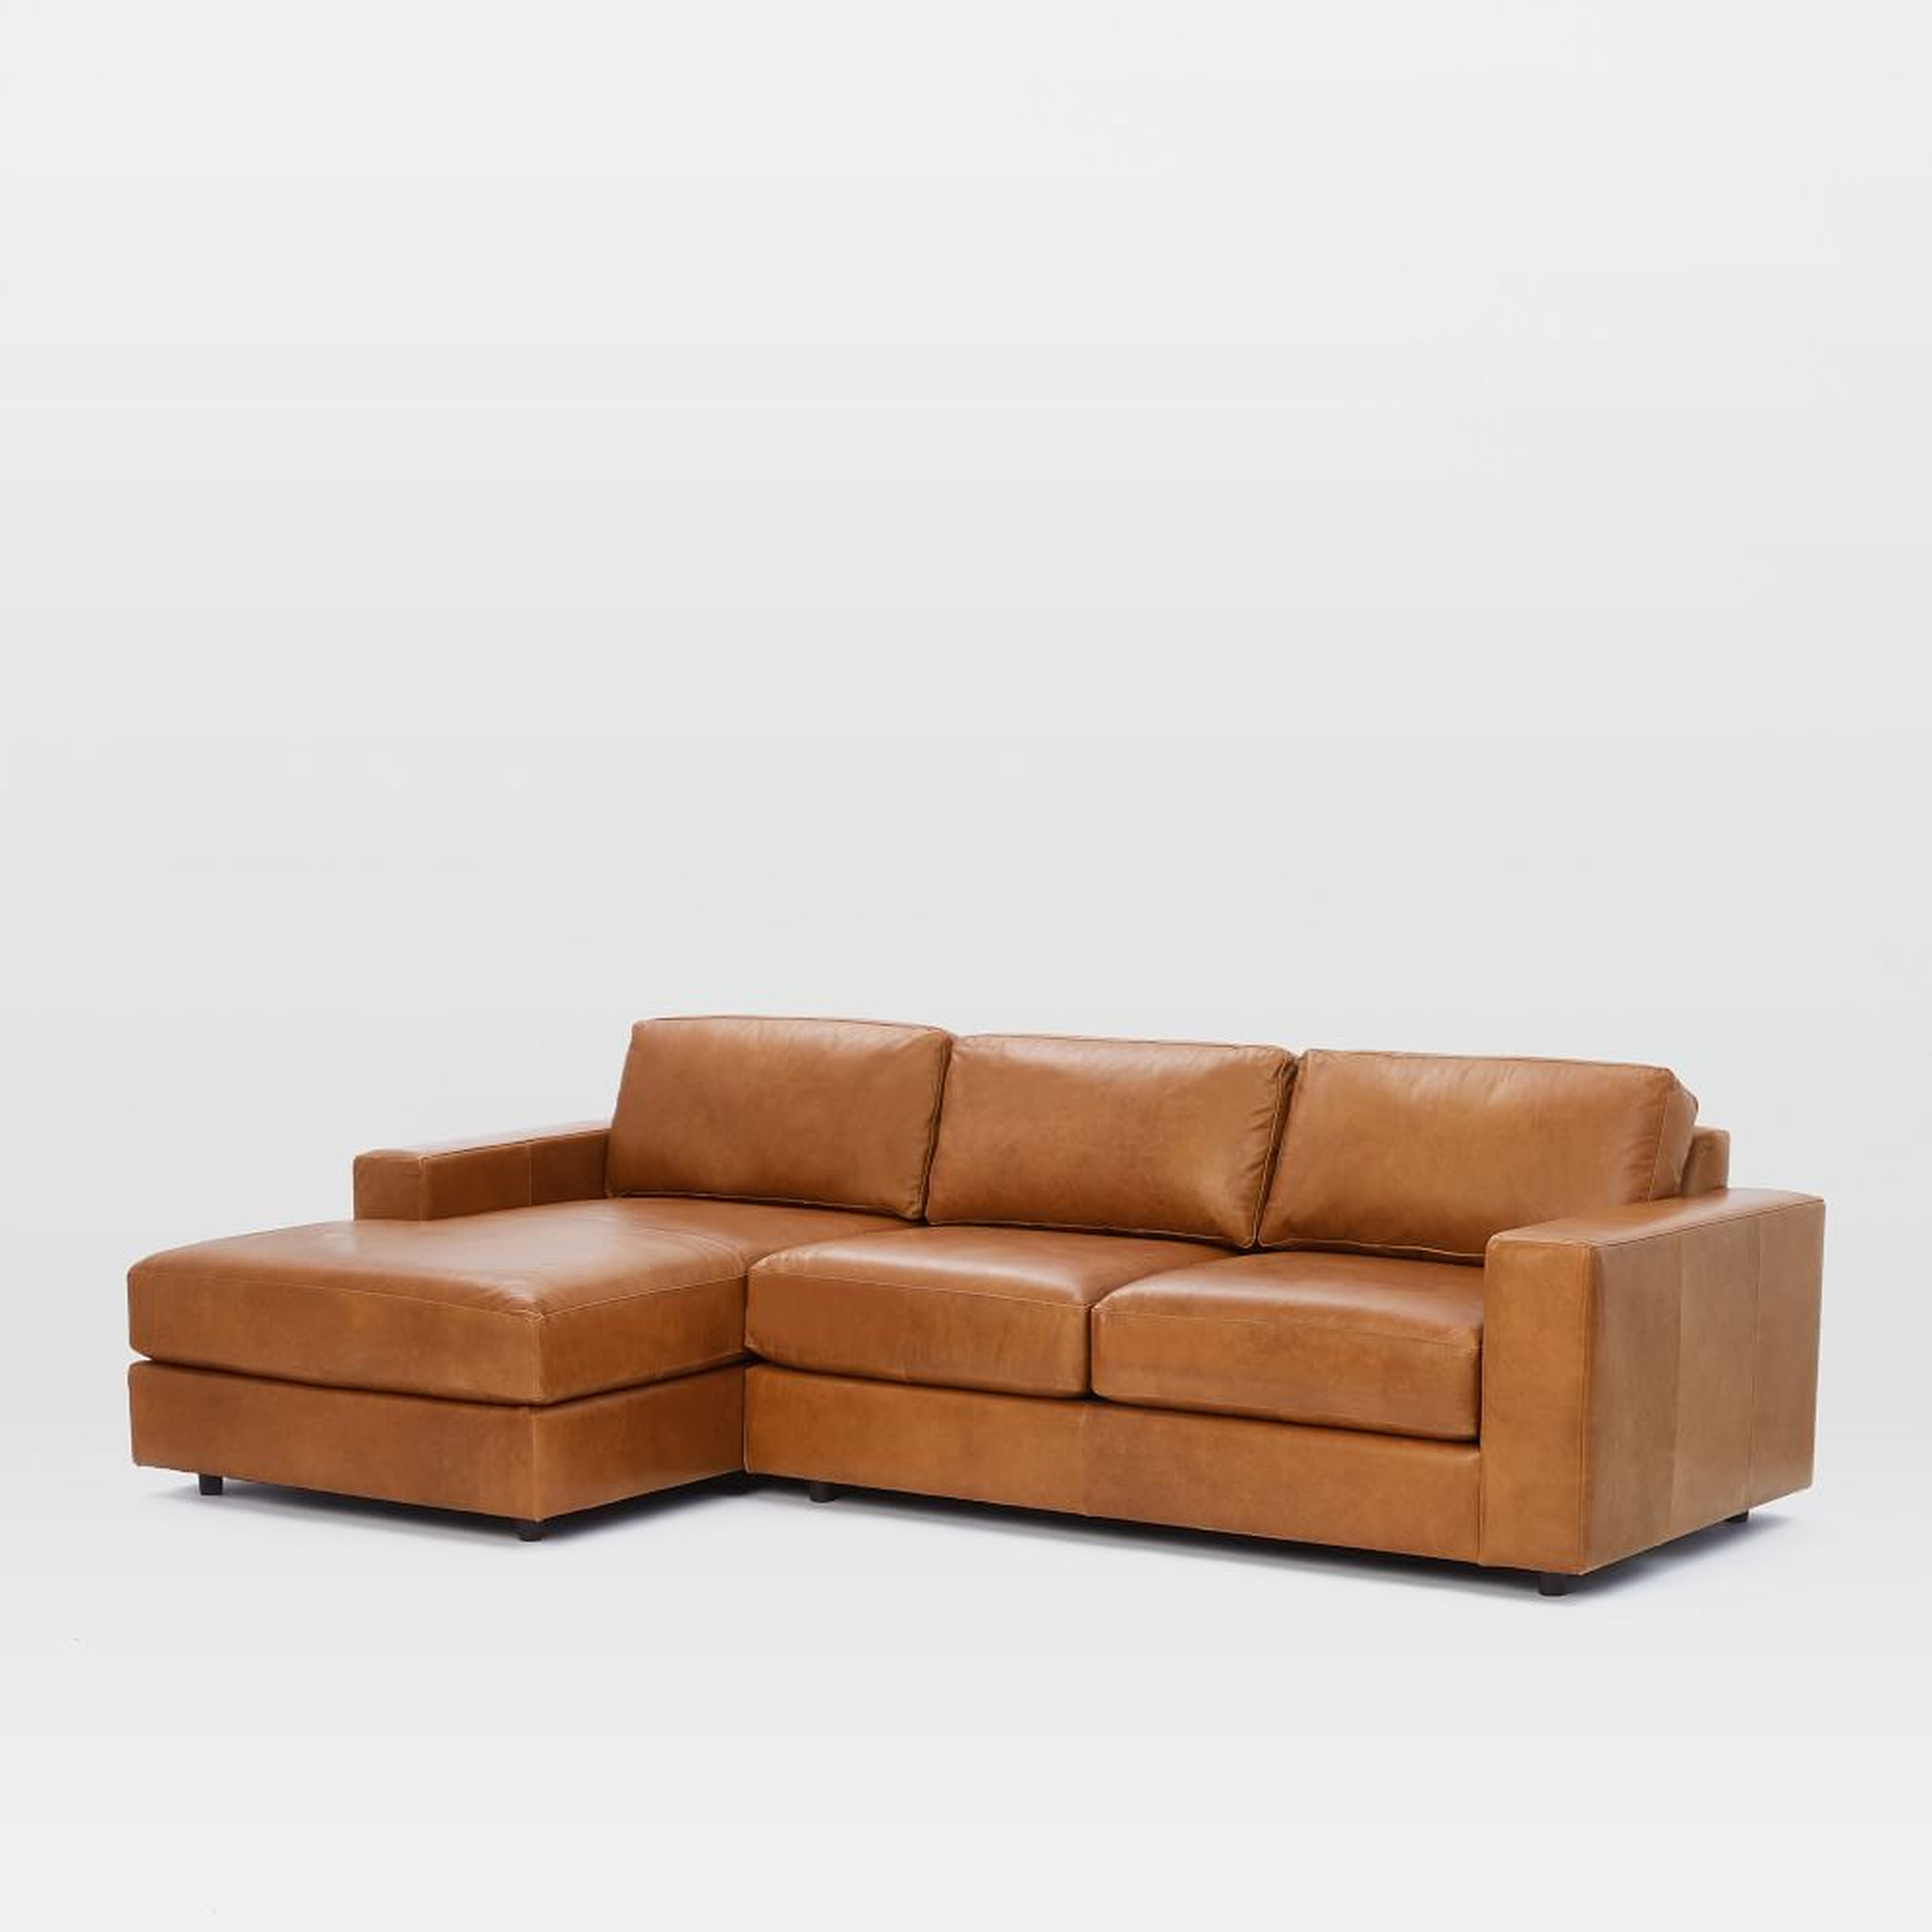 Urban 106" Left 2-Piece Chaise Sectional, Saddle Leather, Nut, Poly-Fill - West Elm